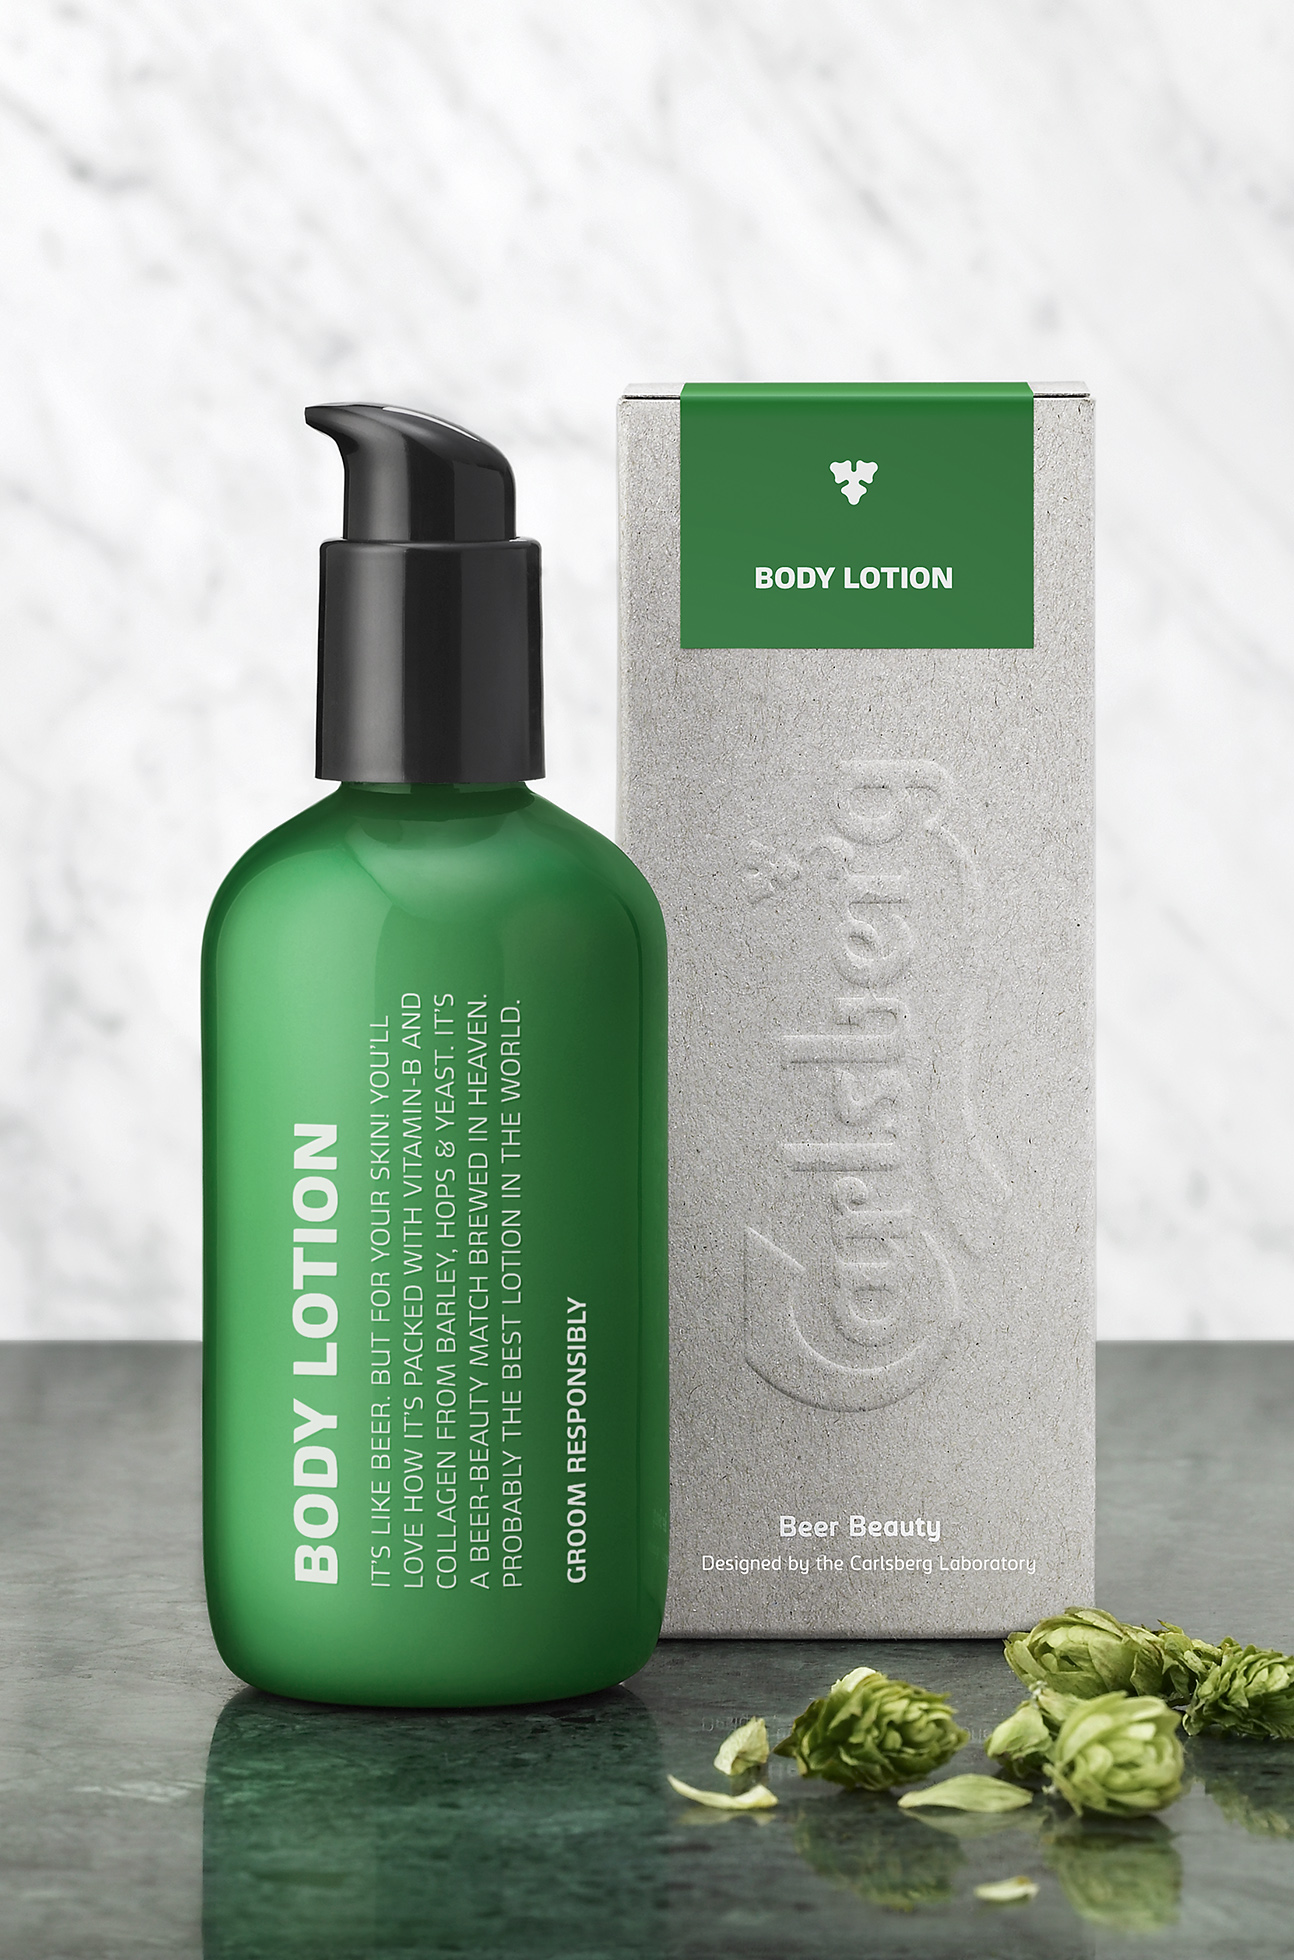 Carlsberg beer launches male beauty products